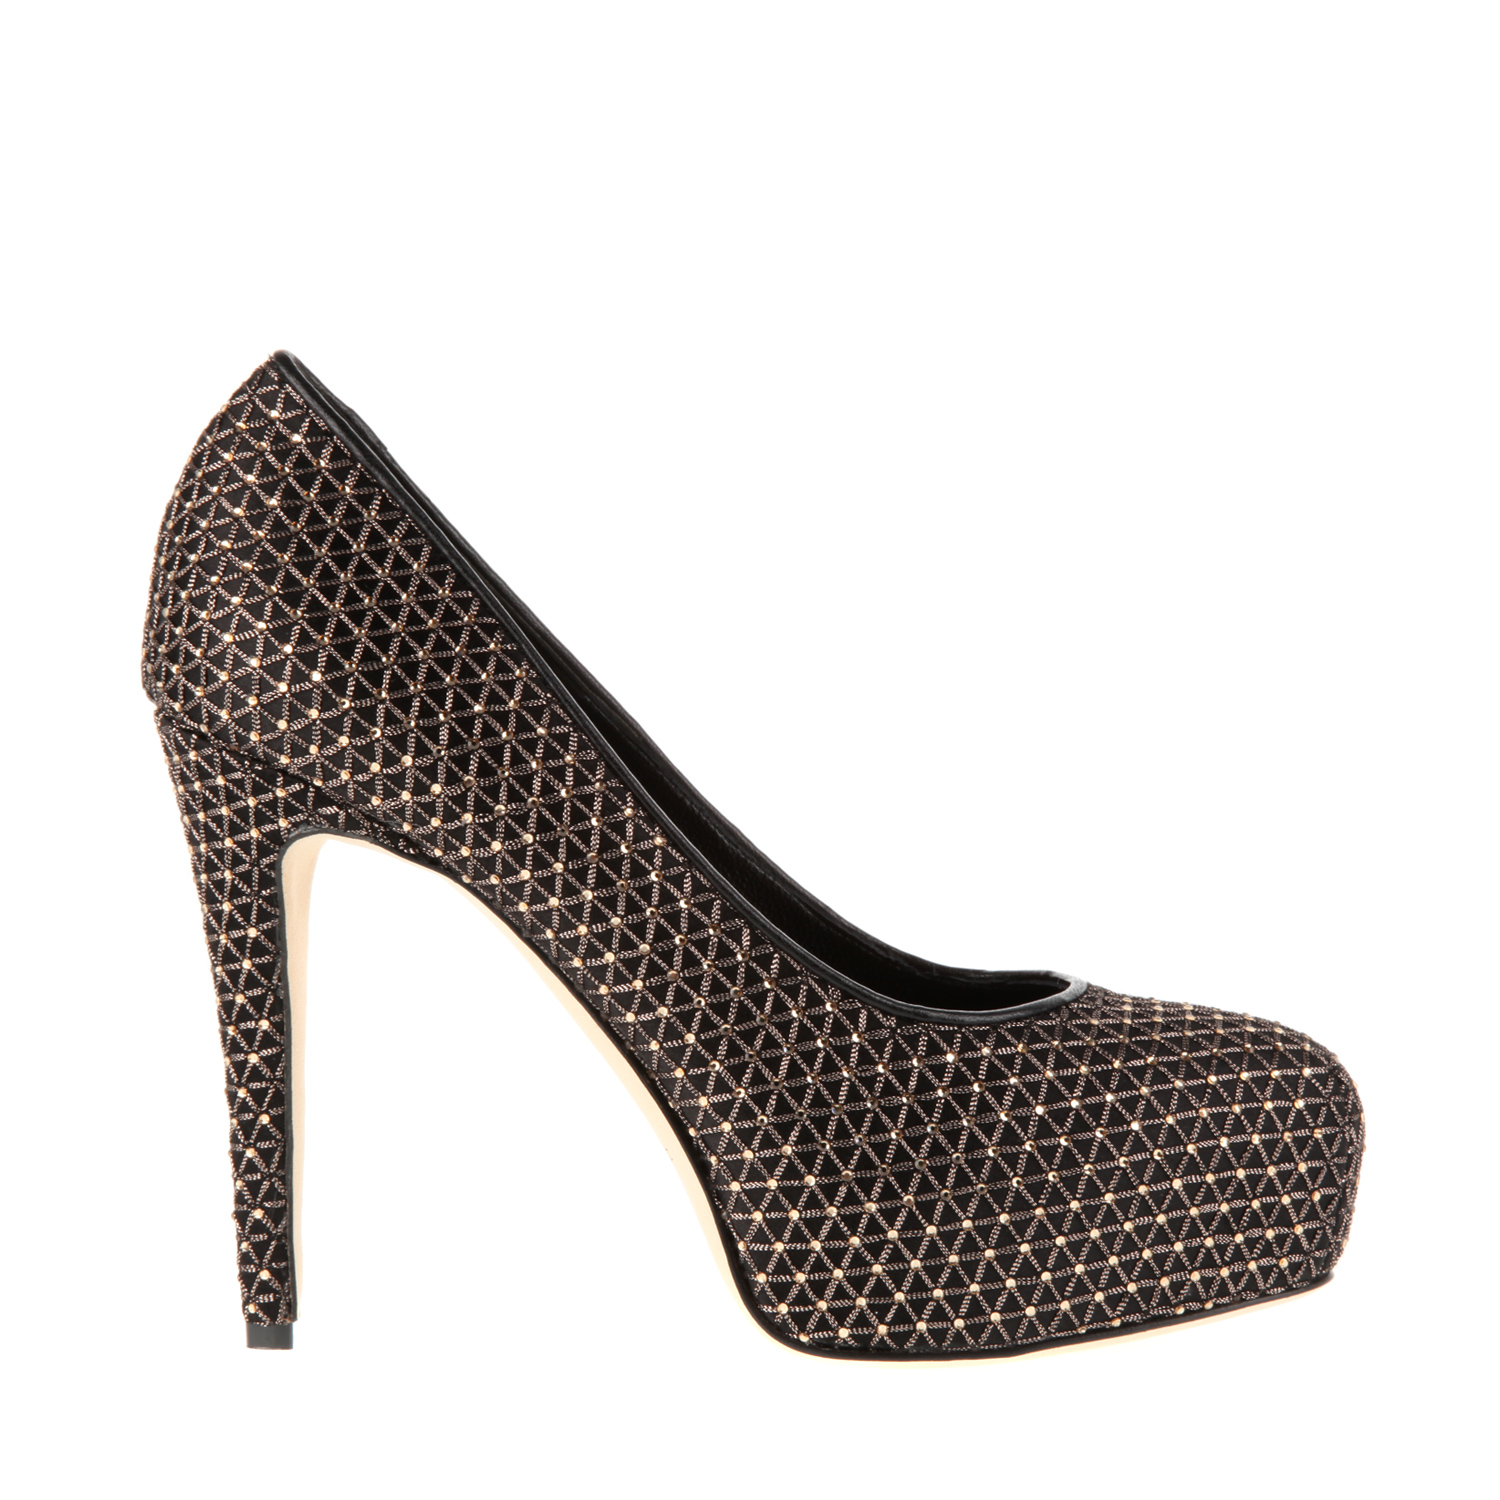 Brian Atwood Maniac Platform Pumps in Silk with Geometric Embroideries ...